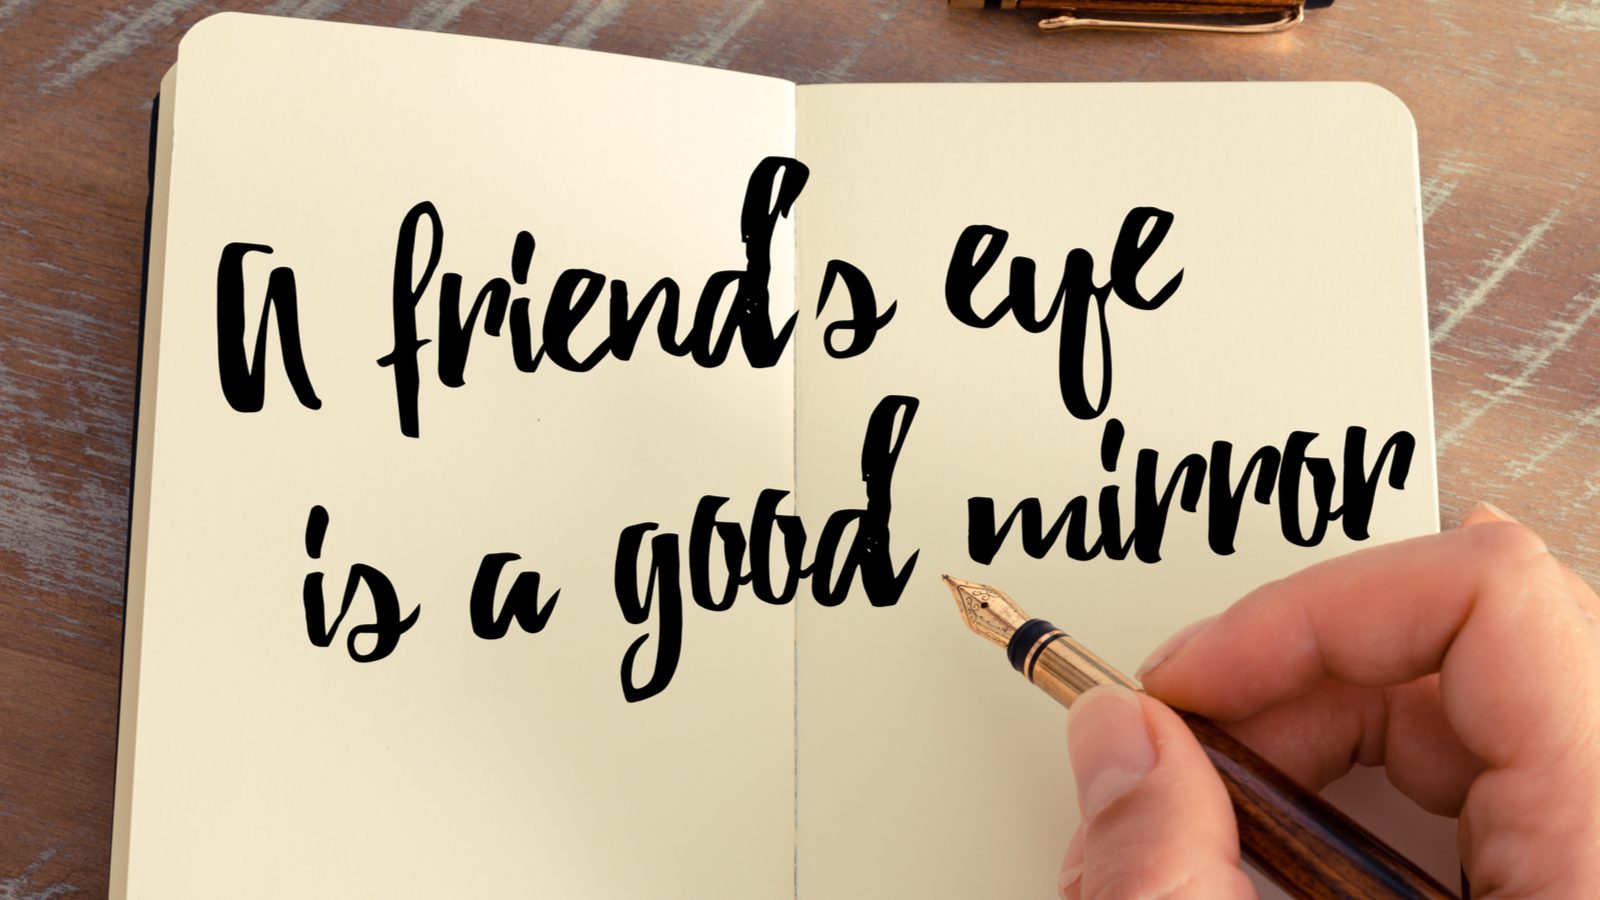 Happy Friendship Day 2021: Images, Wishes, Quotes, Messages and ...